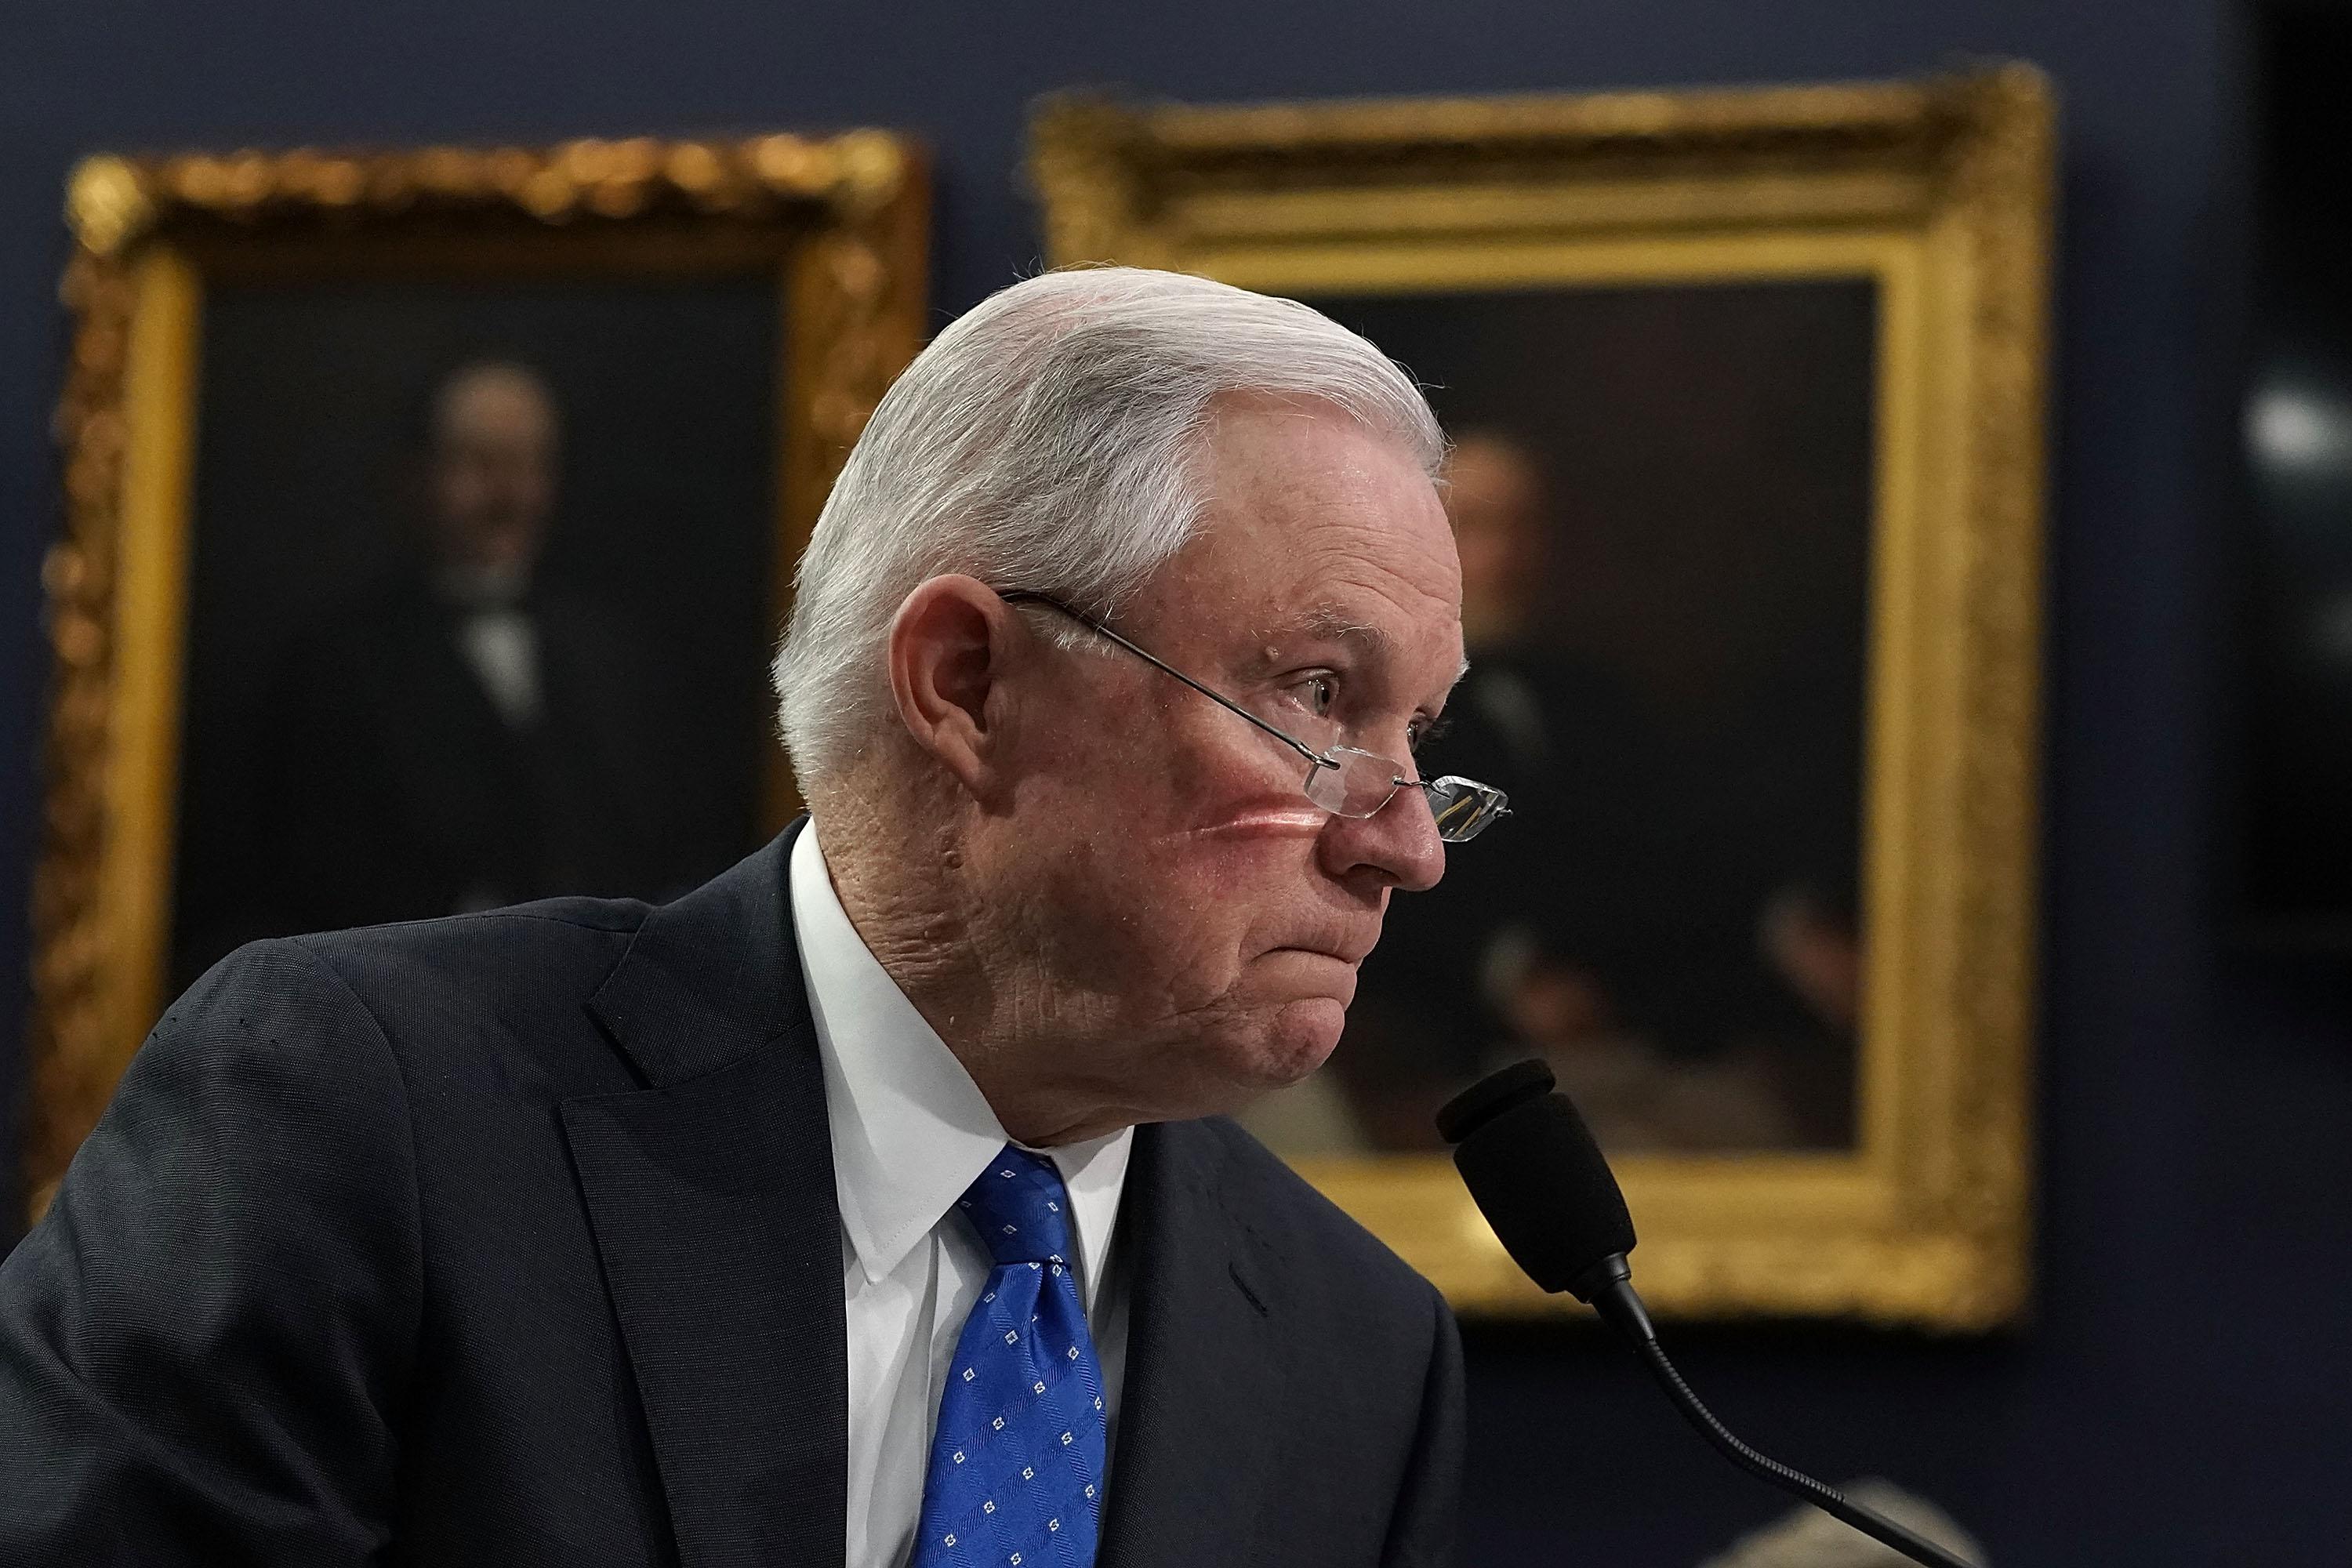 Attorney General Jeff Sessions testifies during a hearing before the Commerce, Justice, Science, and Related Agencies Subcommittee of the House Appropriations Committee on April 26, 2018 on Capitol Hill in Washington, D.C. 